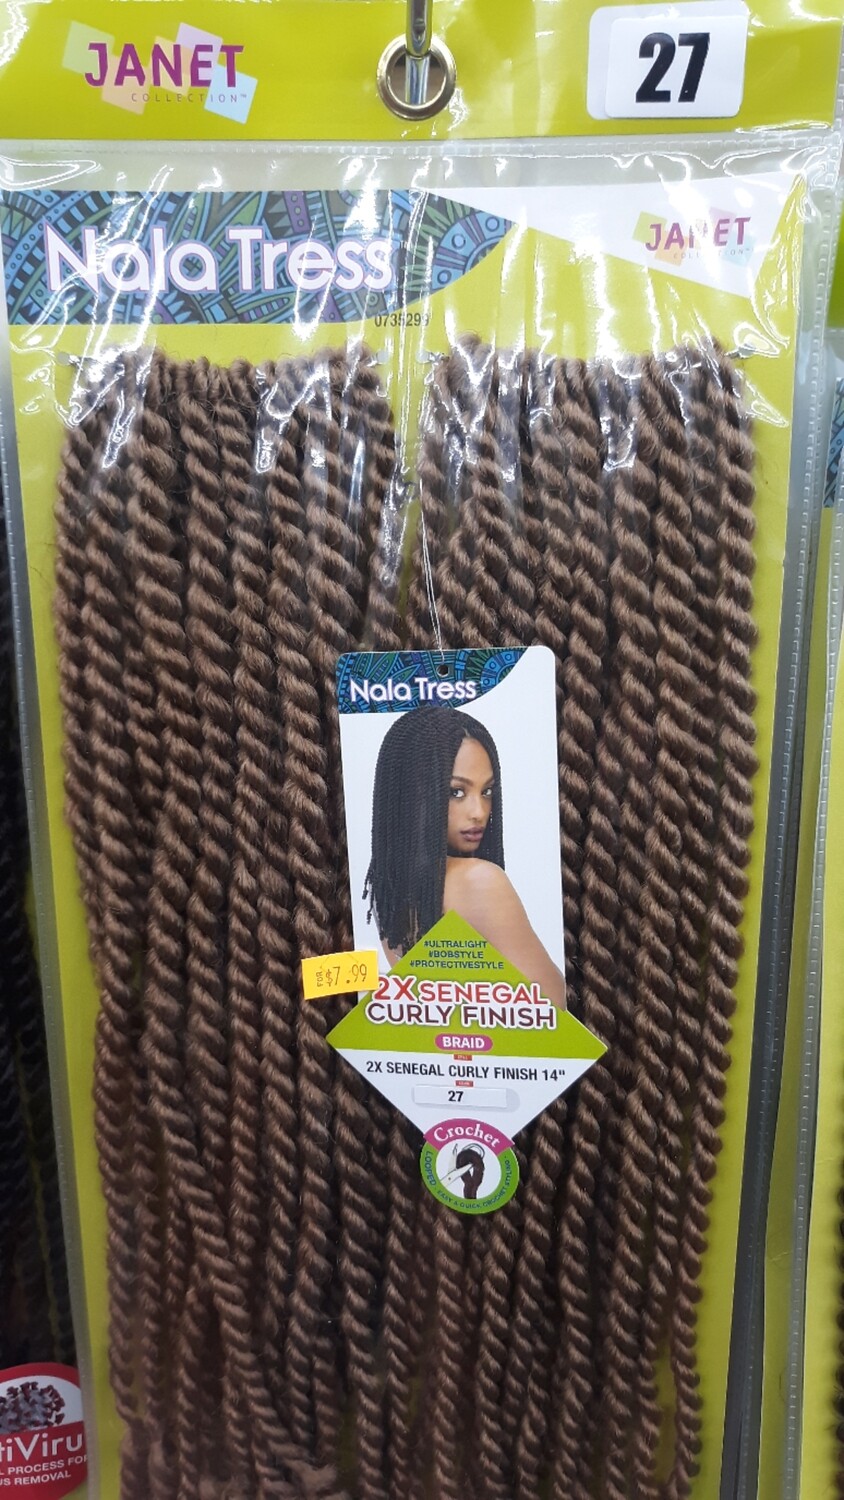 Janet Collection 2x Senegal Curly Finish 14" (27)